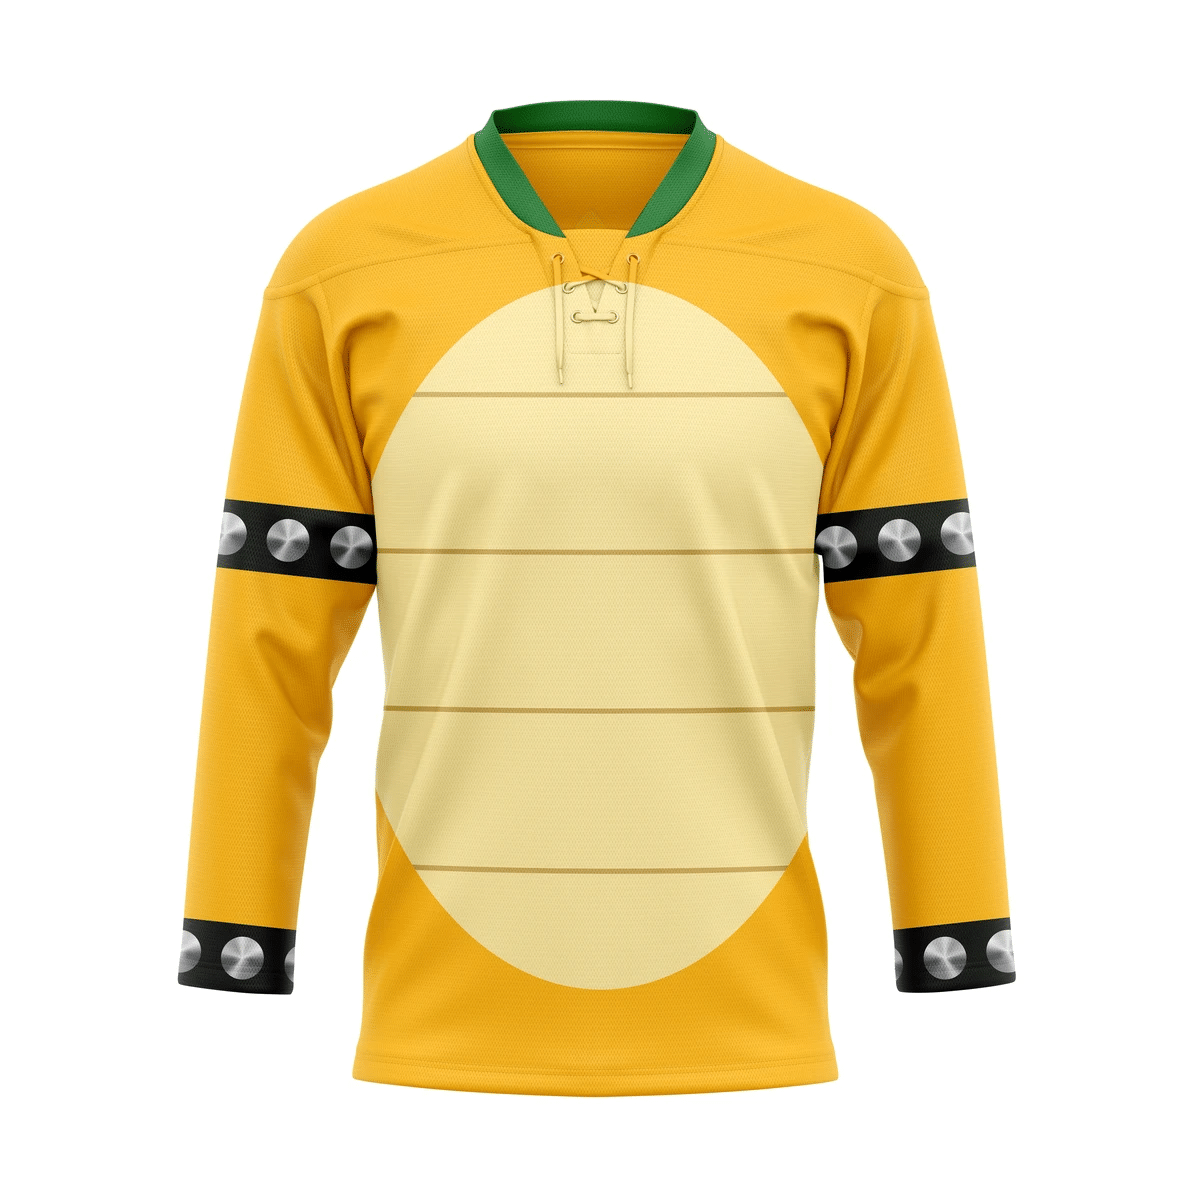 The hockey jersey is a must for every player in a team. 70